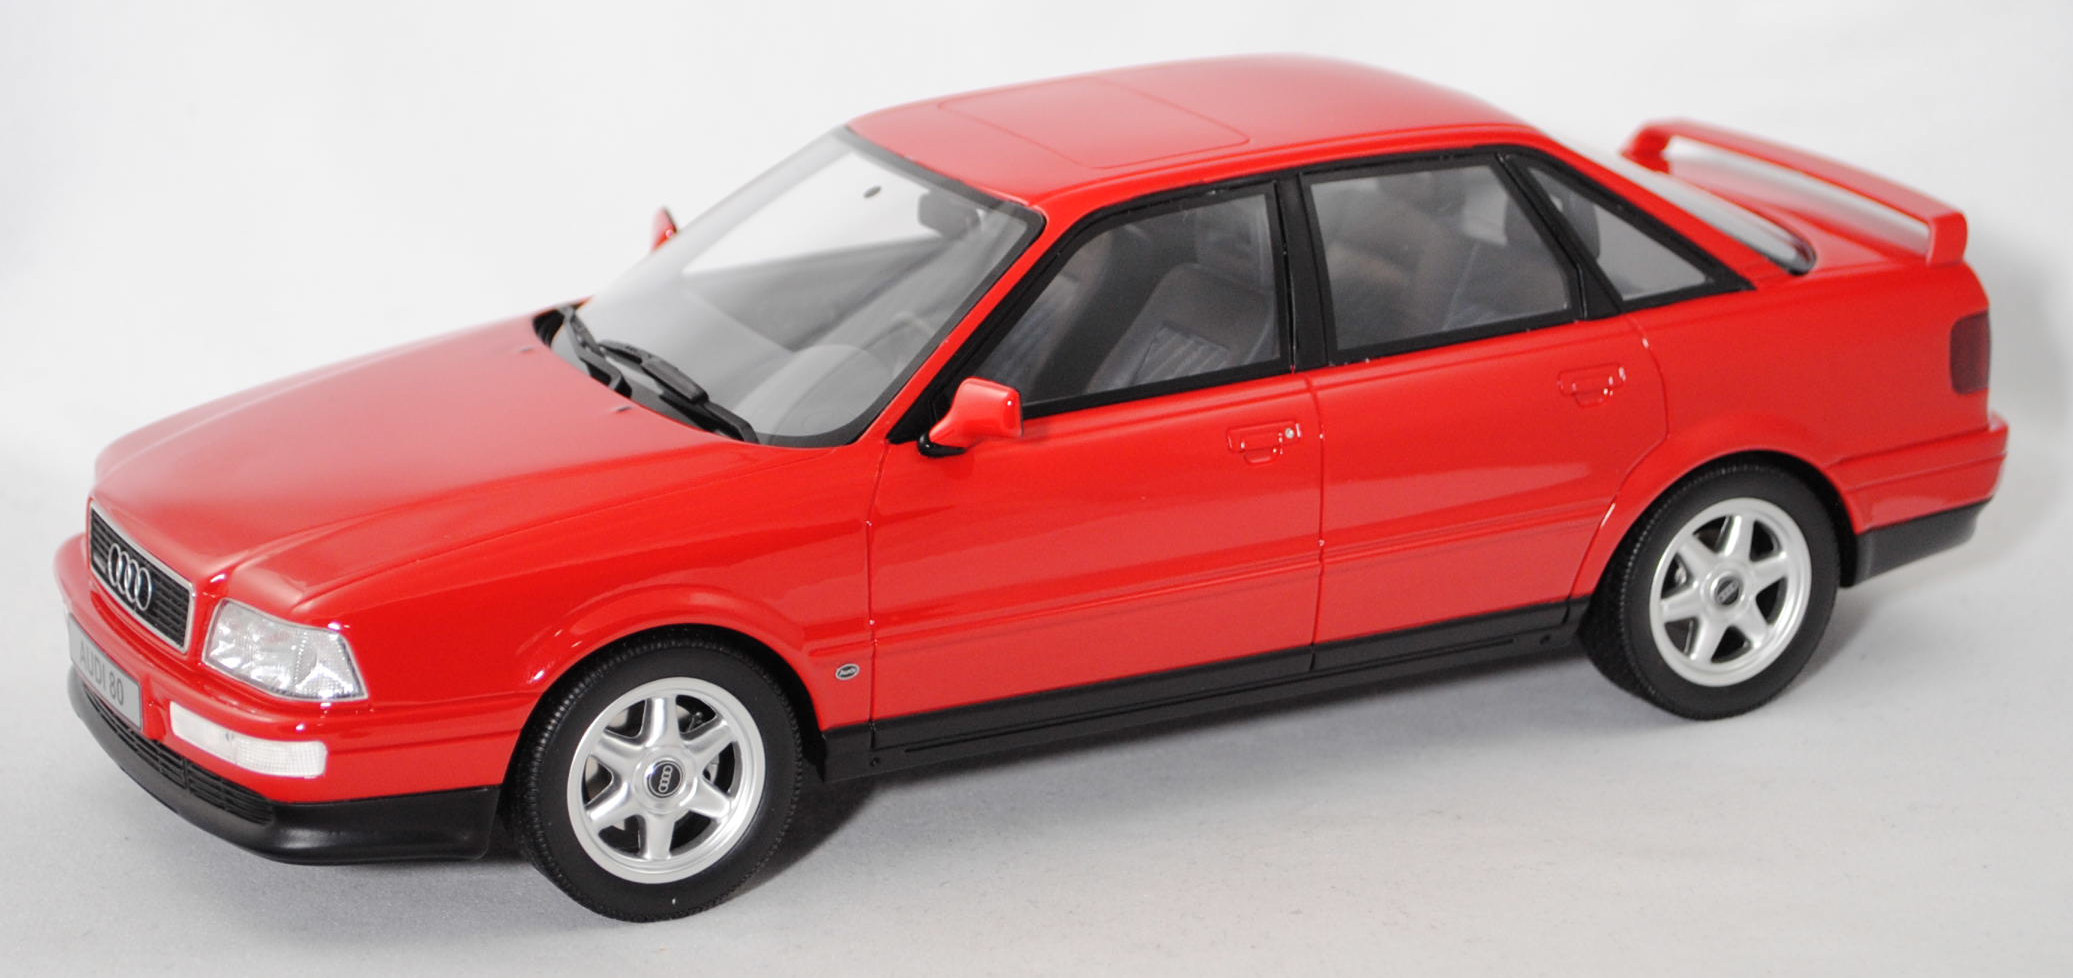 Audi 80 competition (Baureihe B4, Typ 8C, Modell 1994), laserrot (LY3H),  OttO mobile, 1:18, mb, Audi 60/72/80/90, Audi, Online-Shop